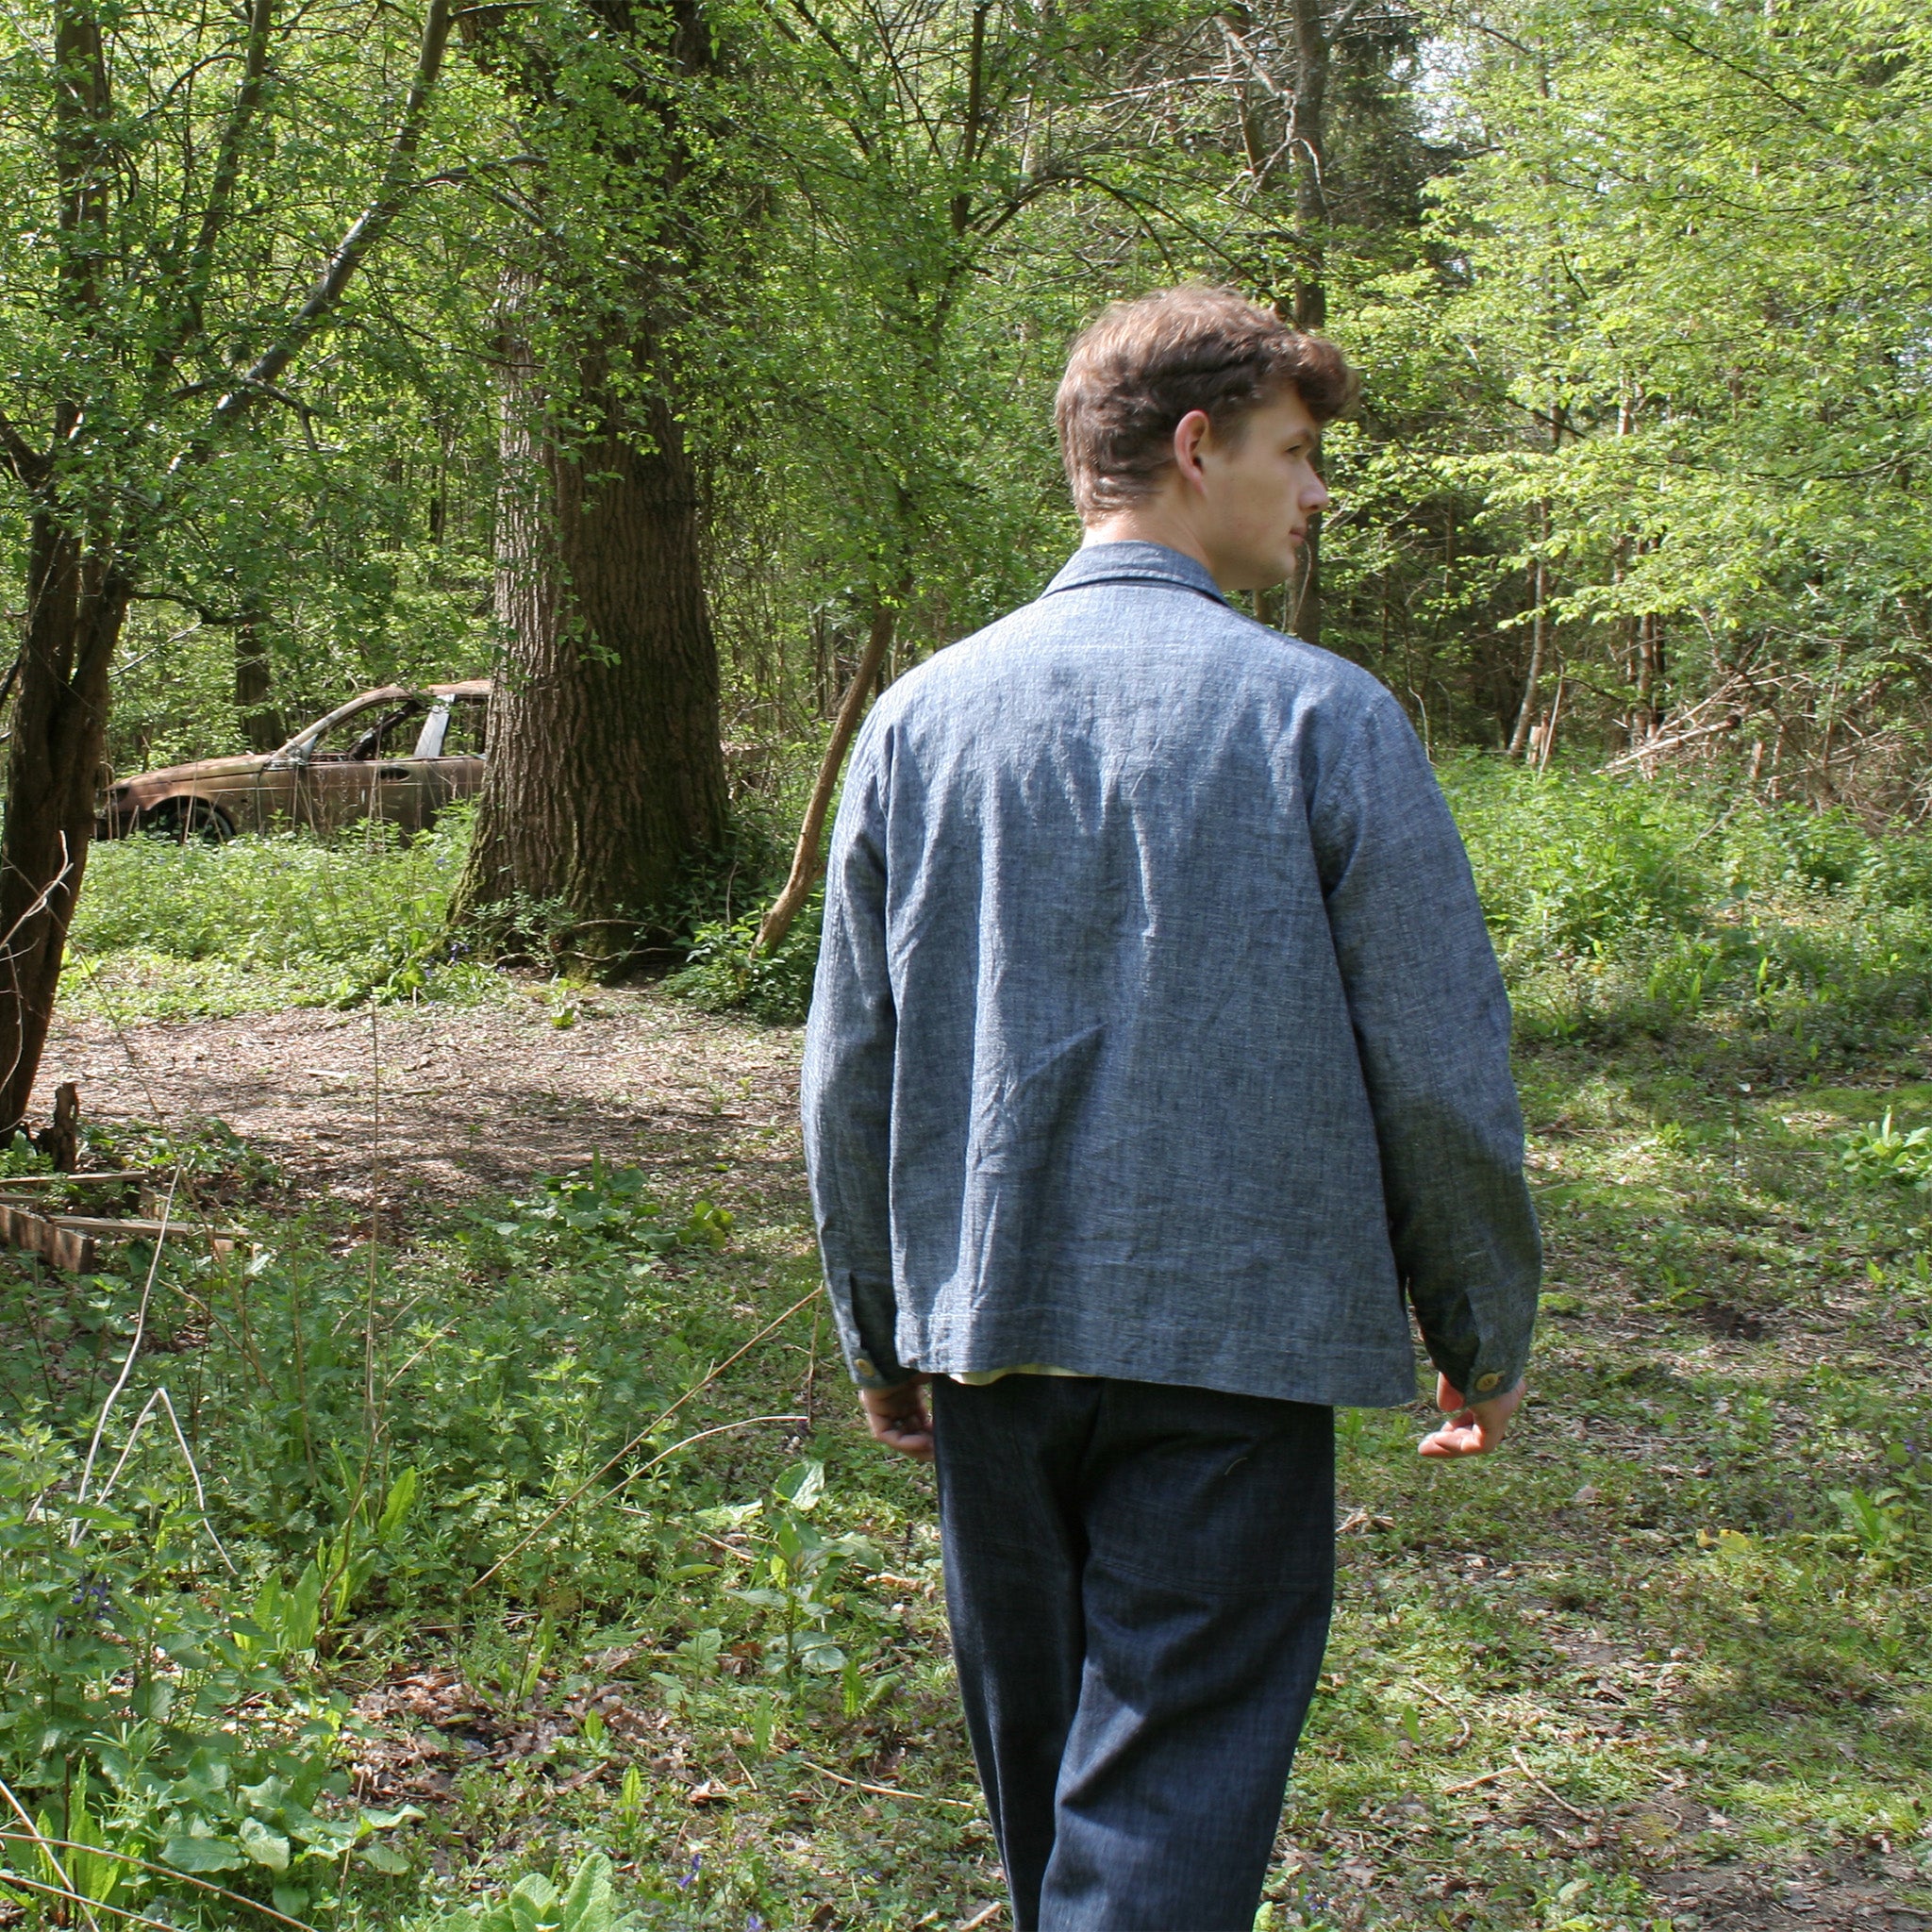 back view of a young man walking in a wood, wearing a denim chore jacket and jeans